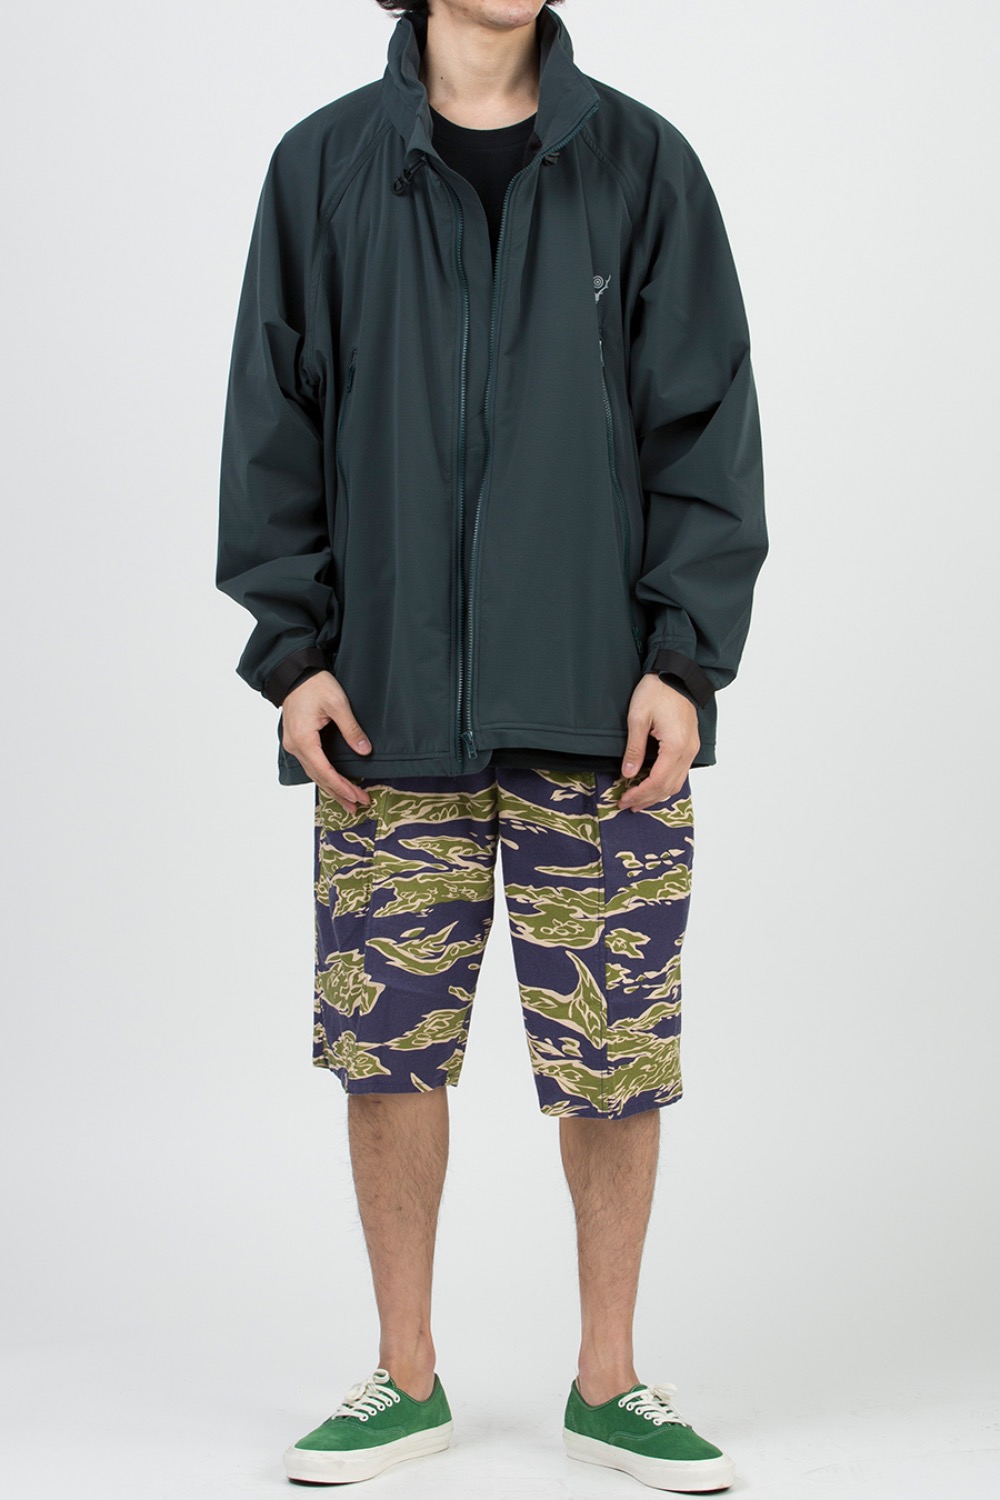 WEATHER EFFECT JACKET - POLY DOBBY CLOTH GREEN